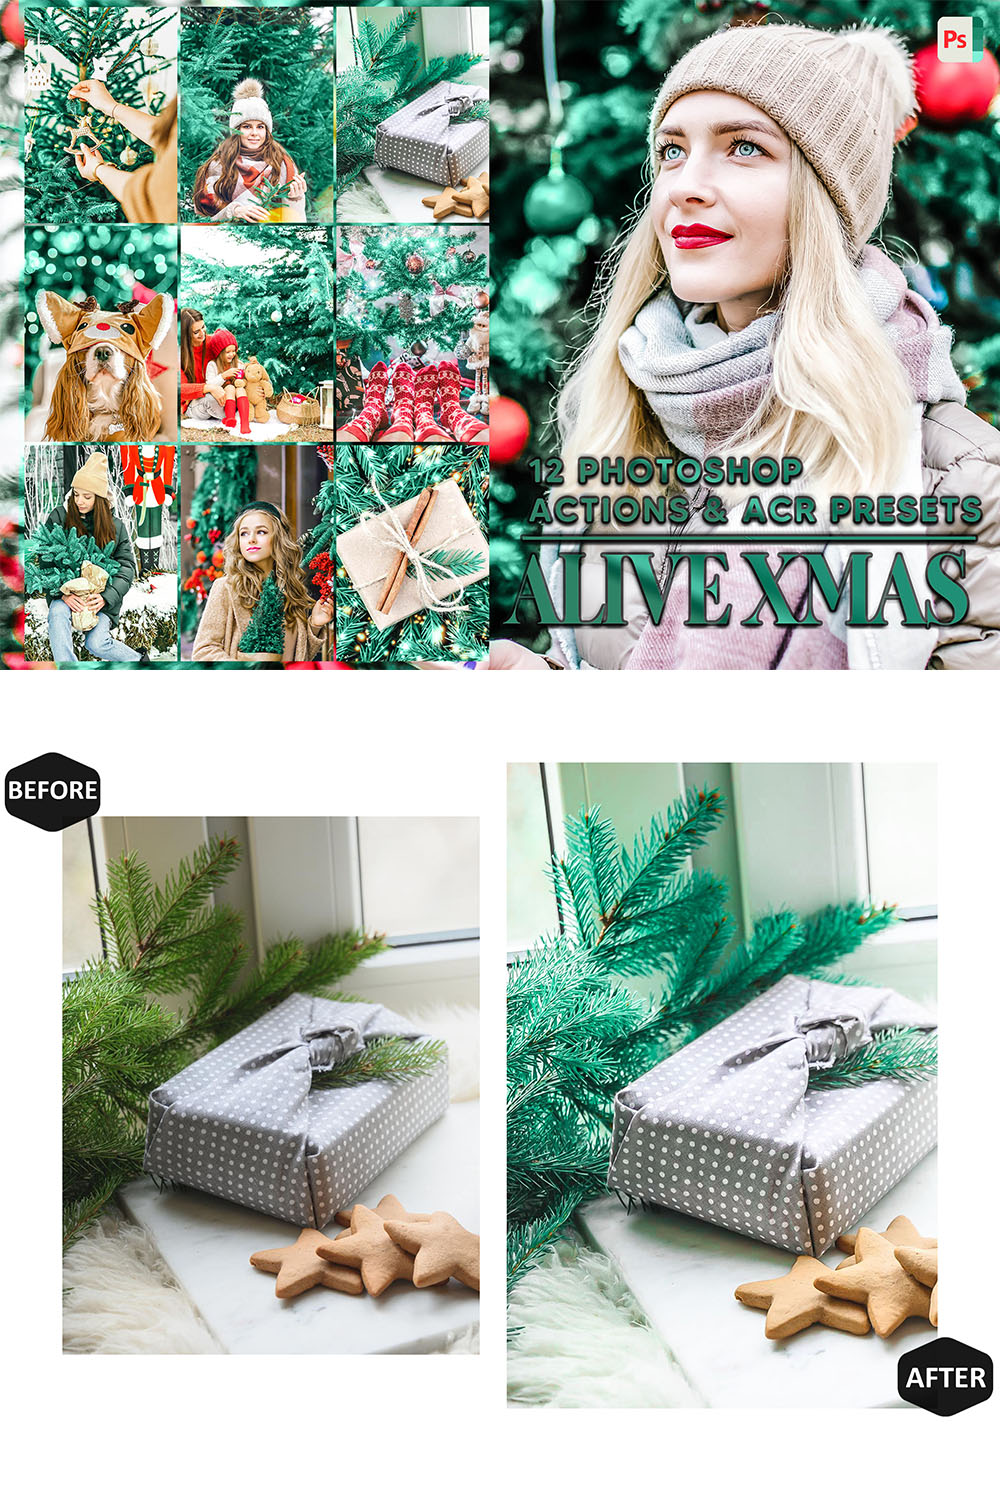 12 Photoshop Actions, Alive Xmas Ps Action, Christmas ACR Preset, Fresh Green Ps Filter, Atn Portrait And Lifestyle Theme For Instagram, Blogger pinterest preview image.